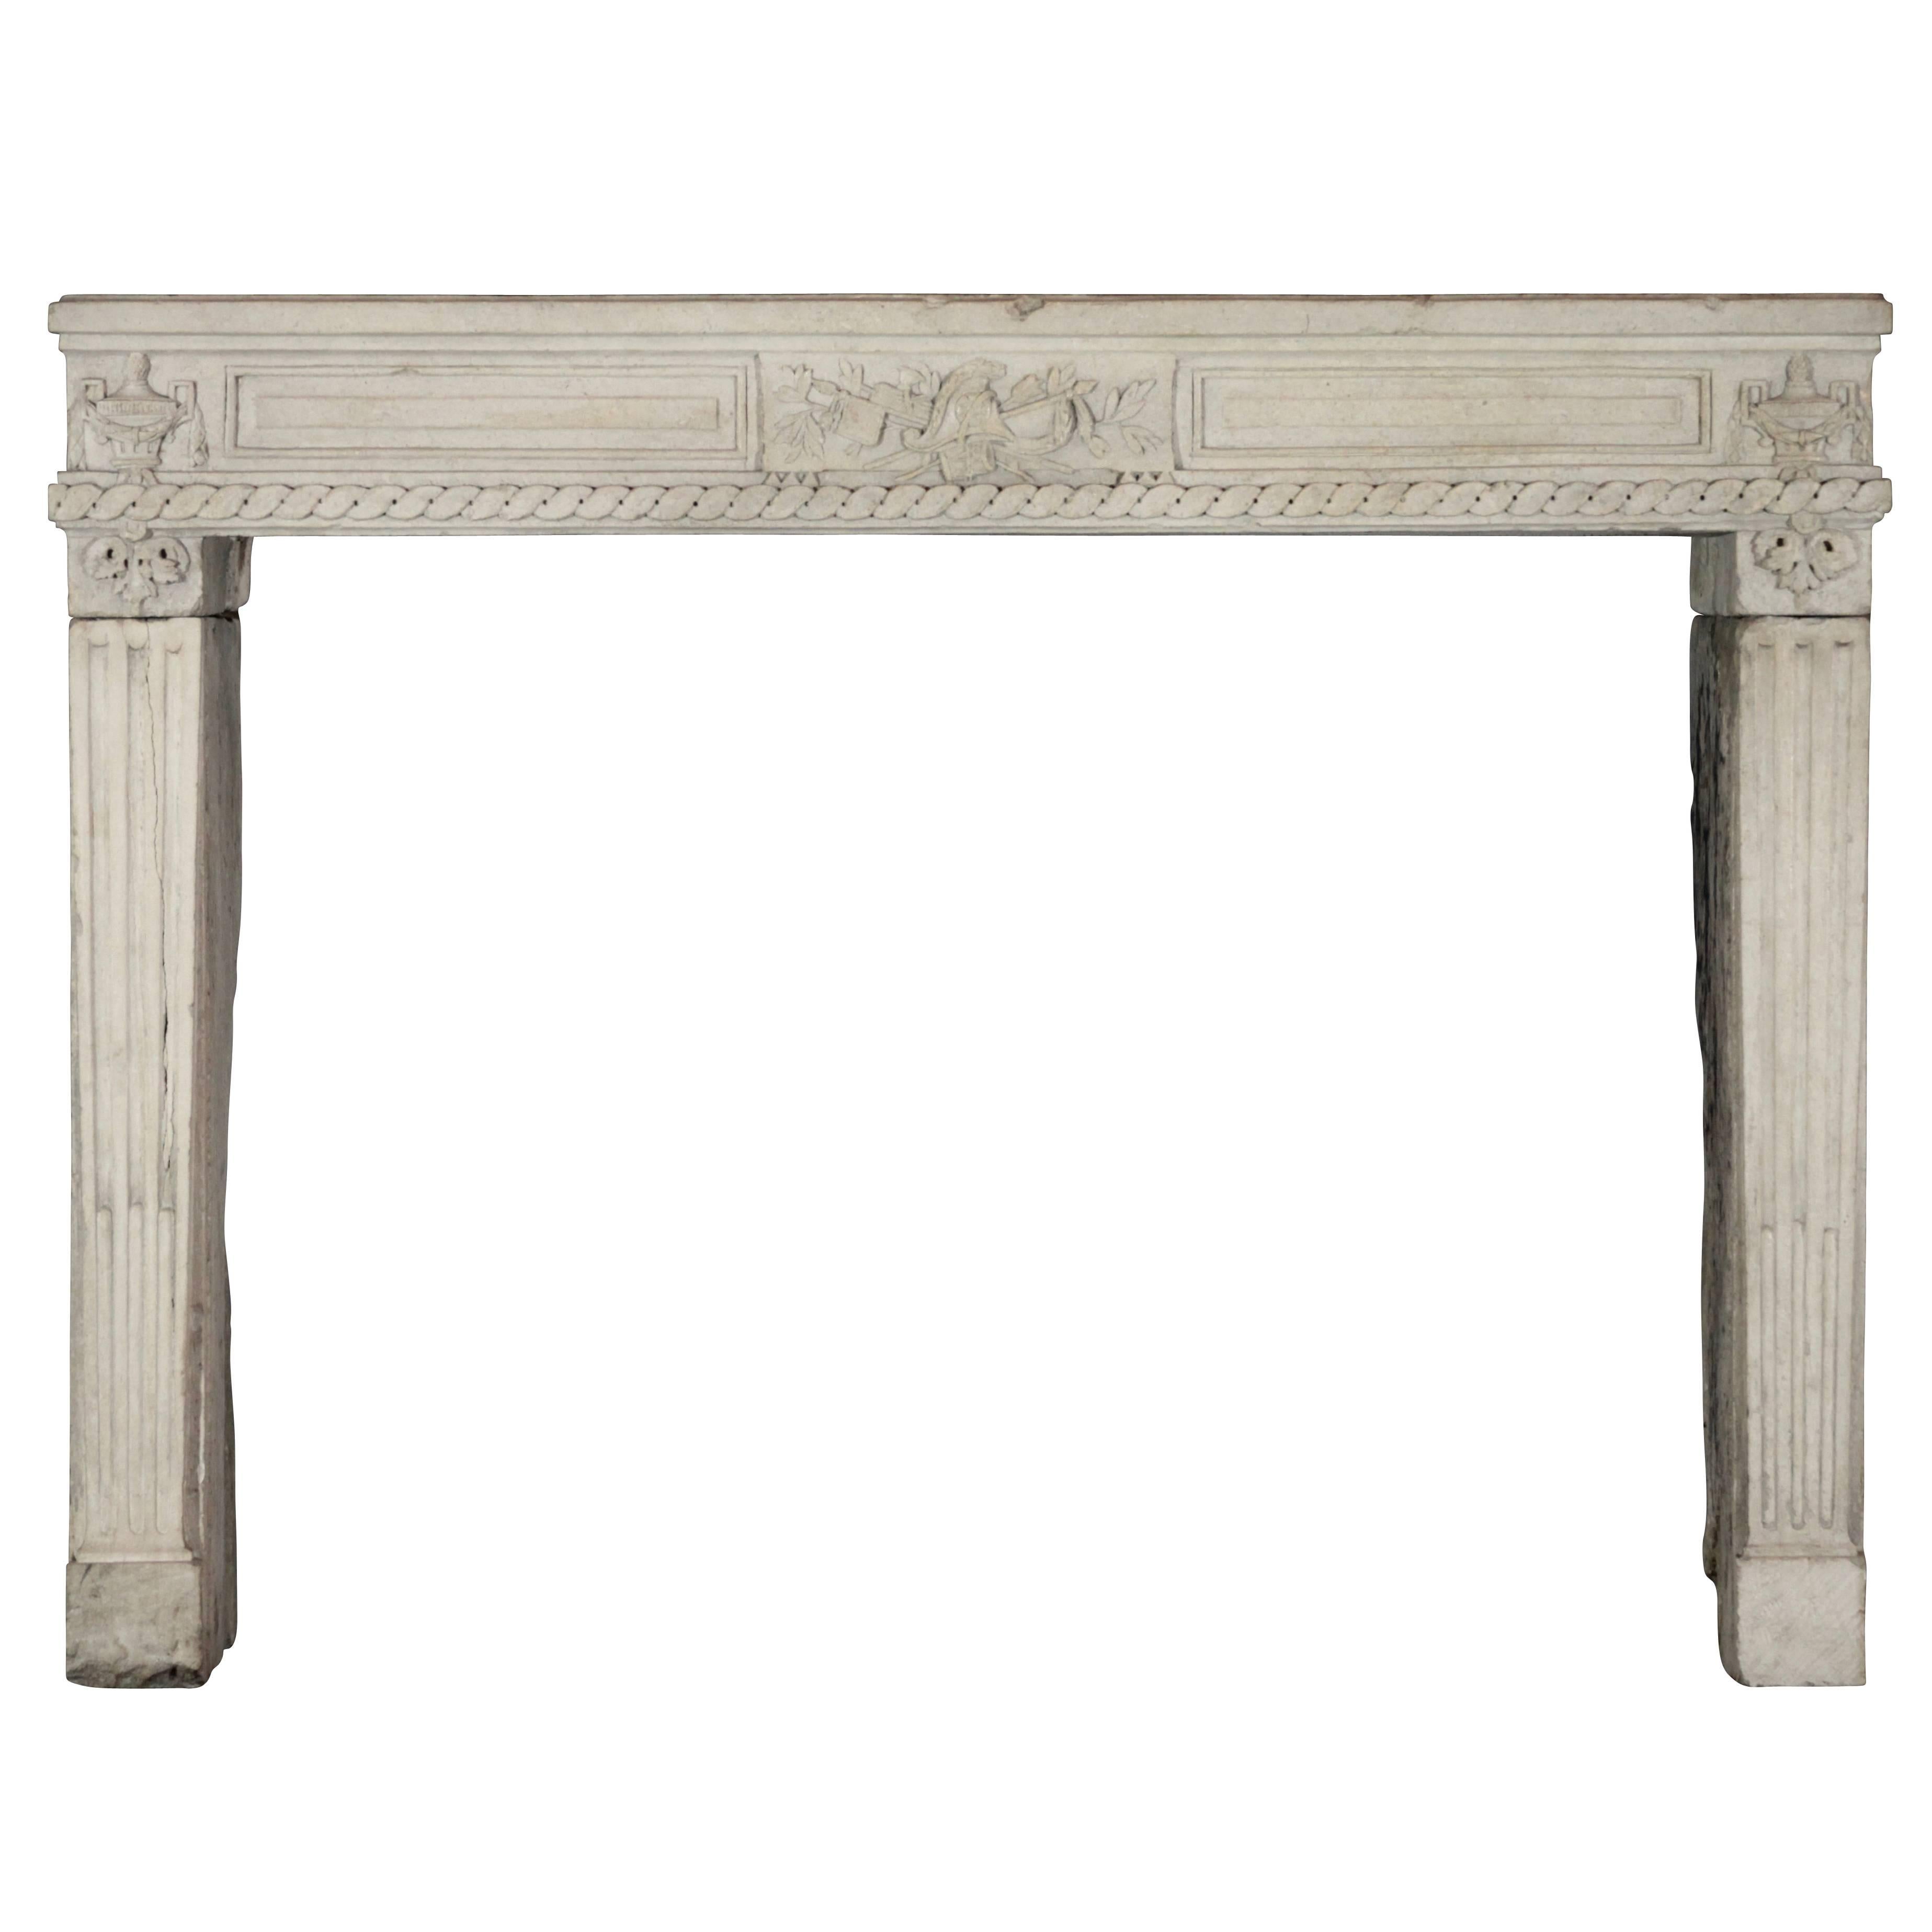 Rare 18th Century French Country Limestone Antique Fireplace Surround